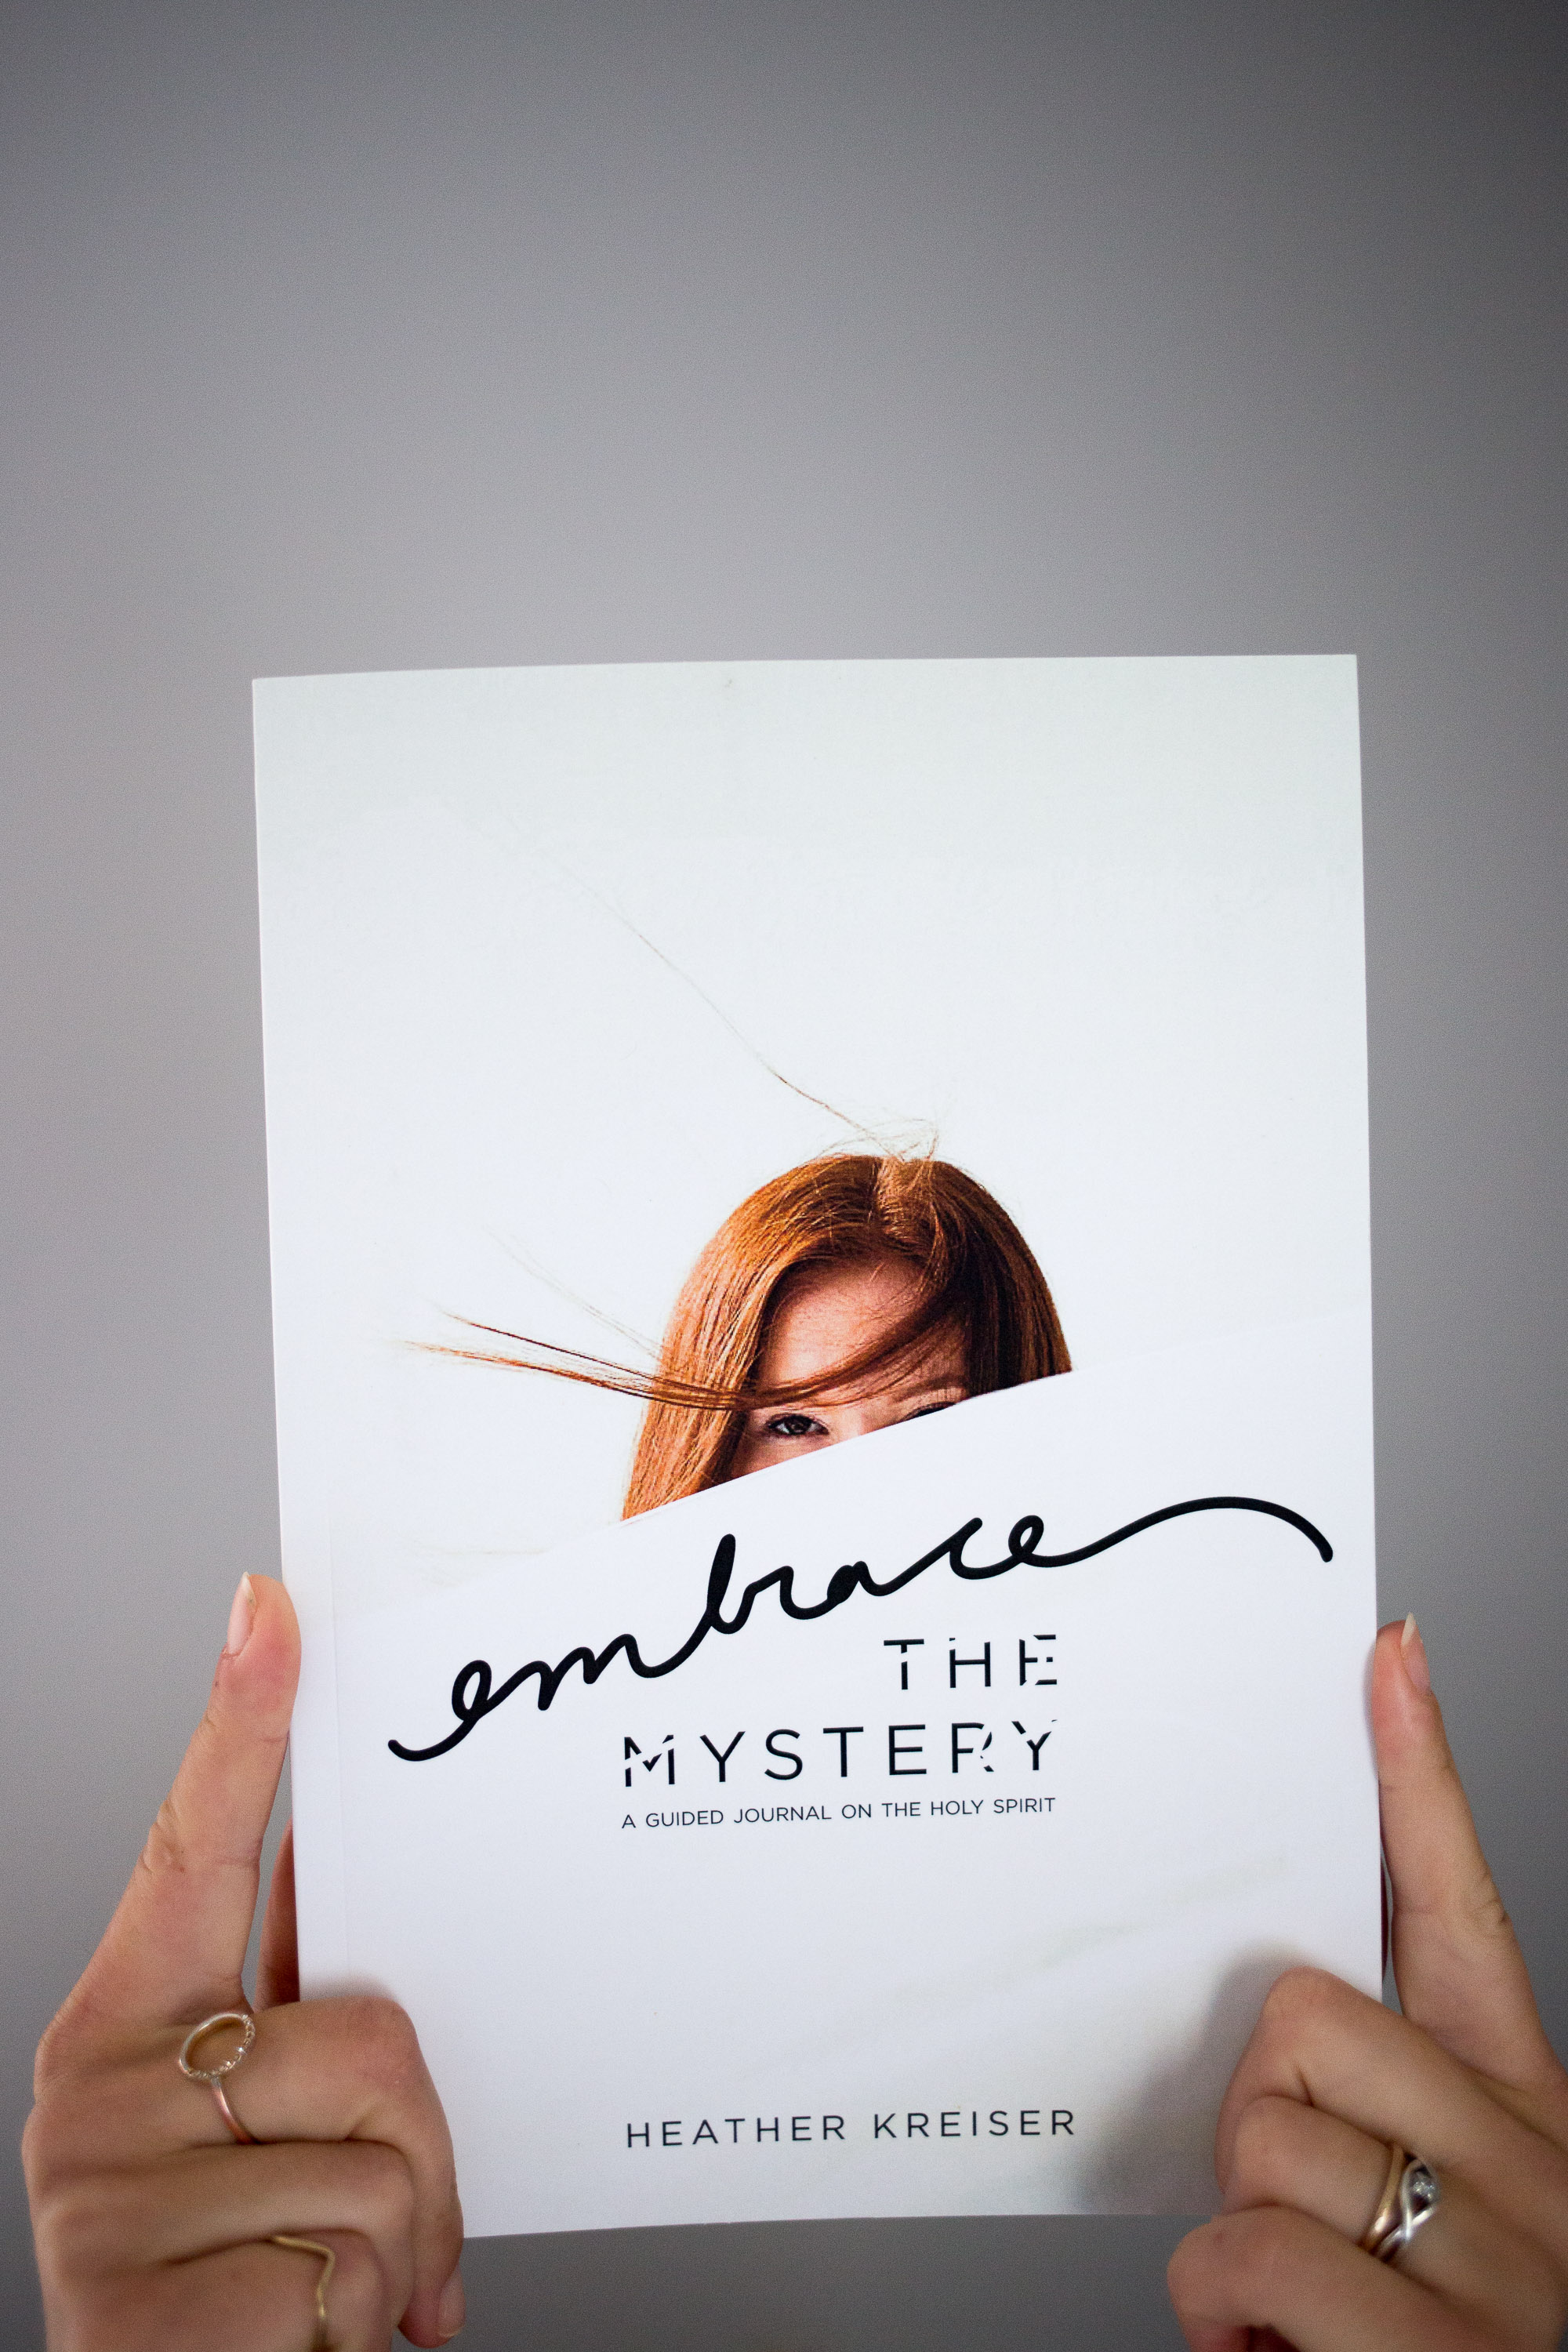 embrace the mystery launch day